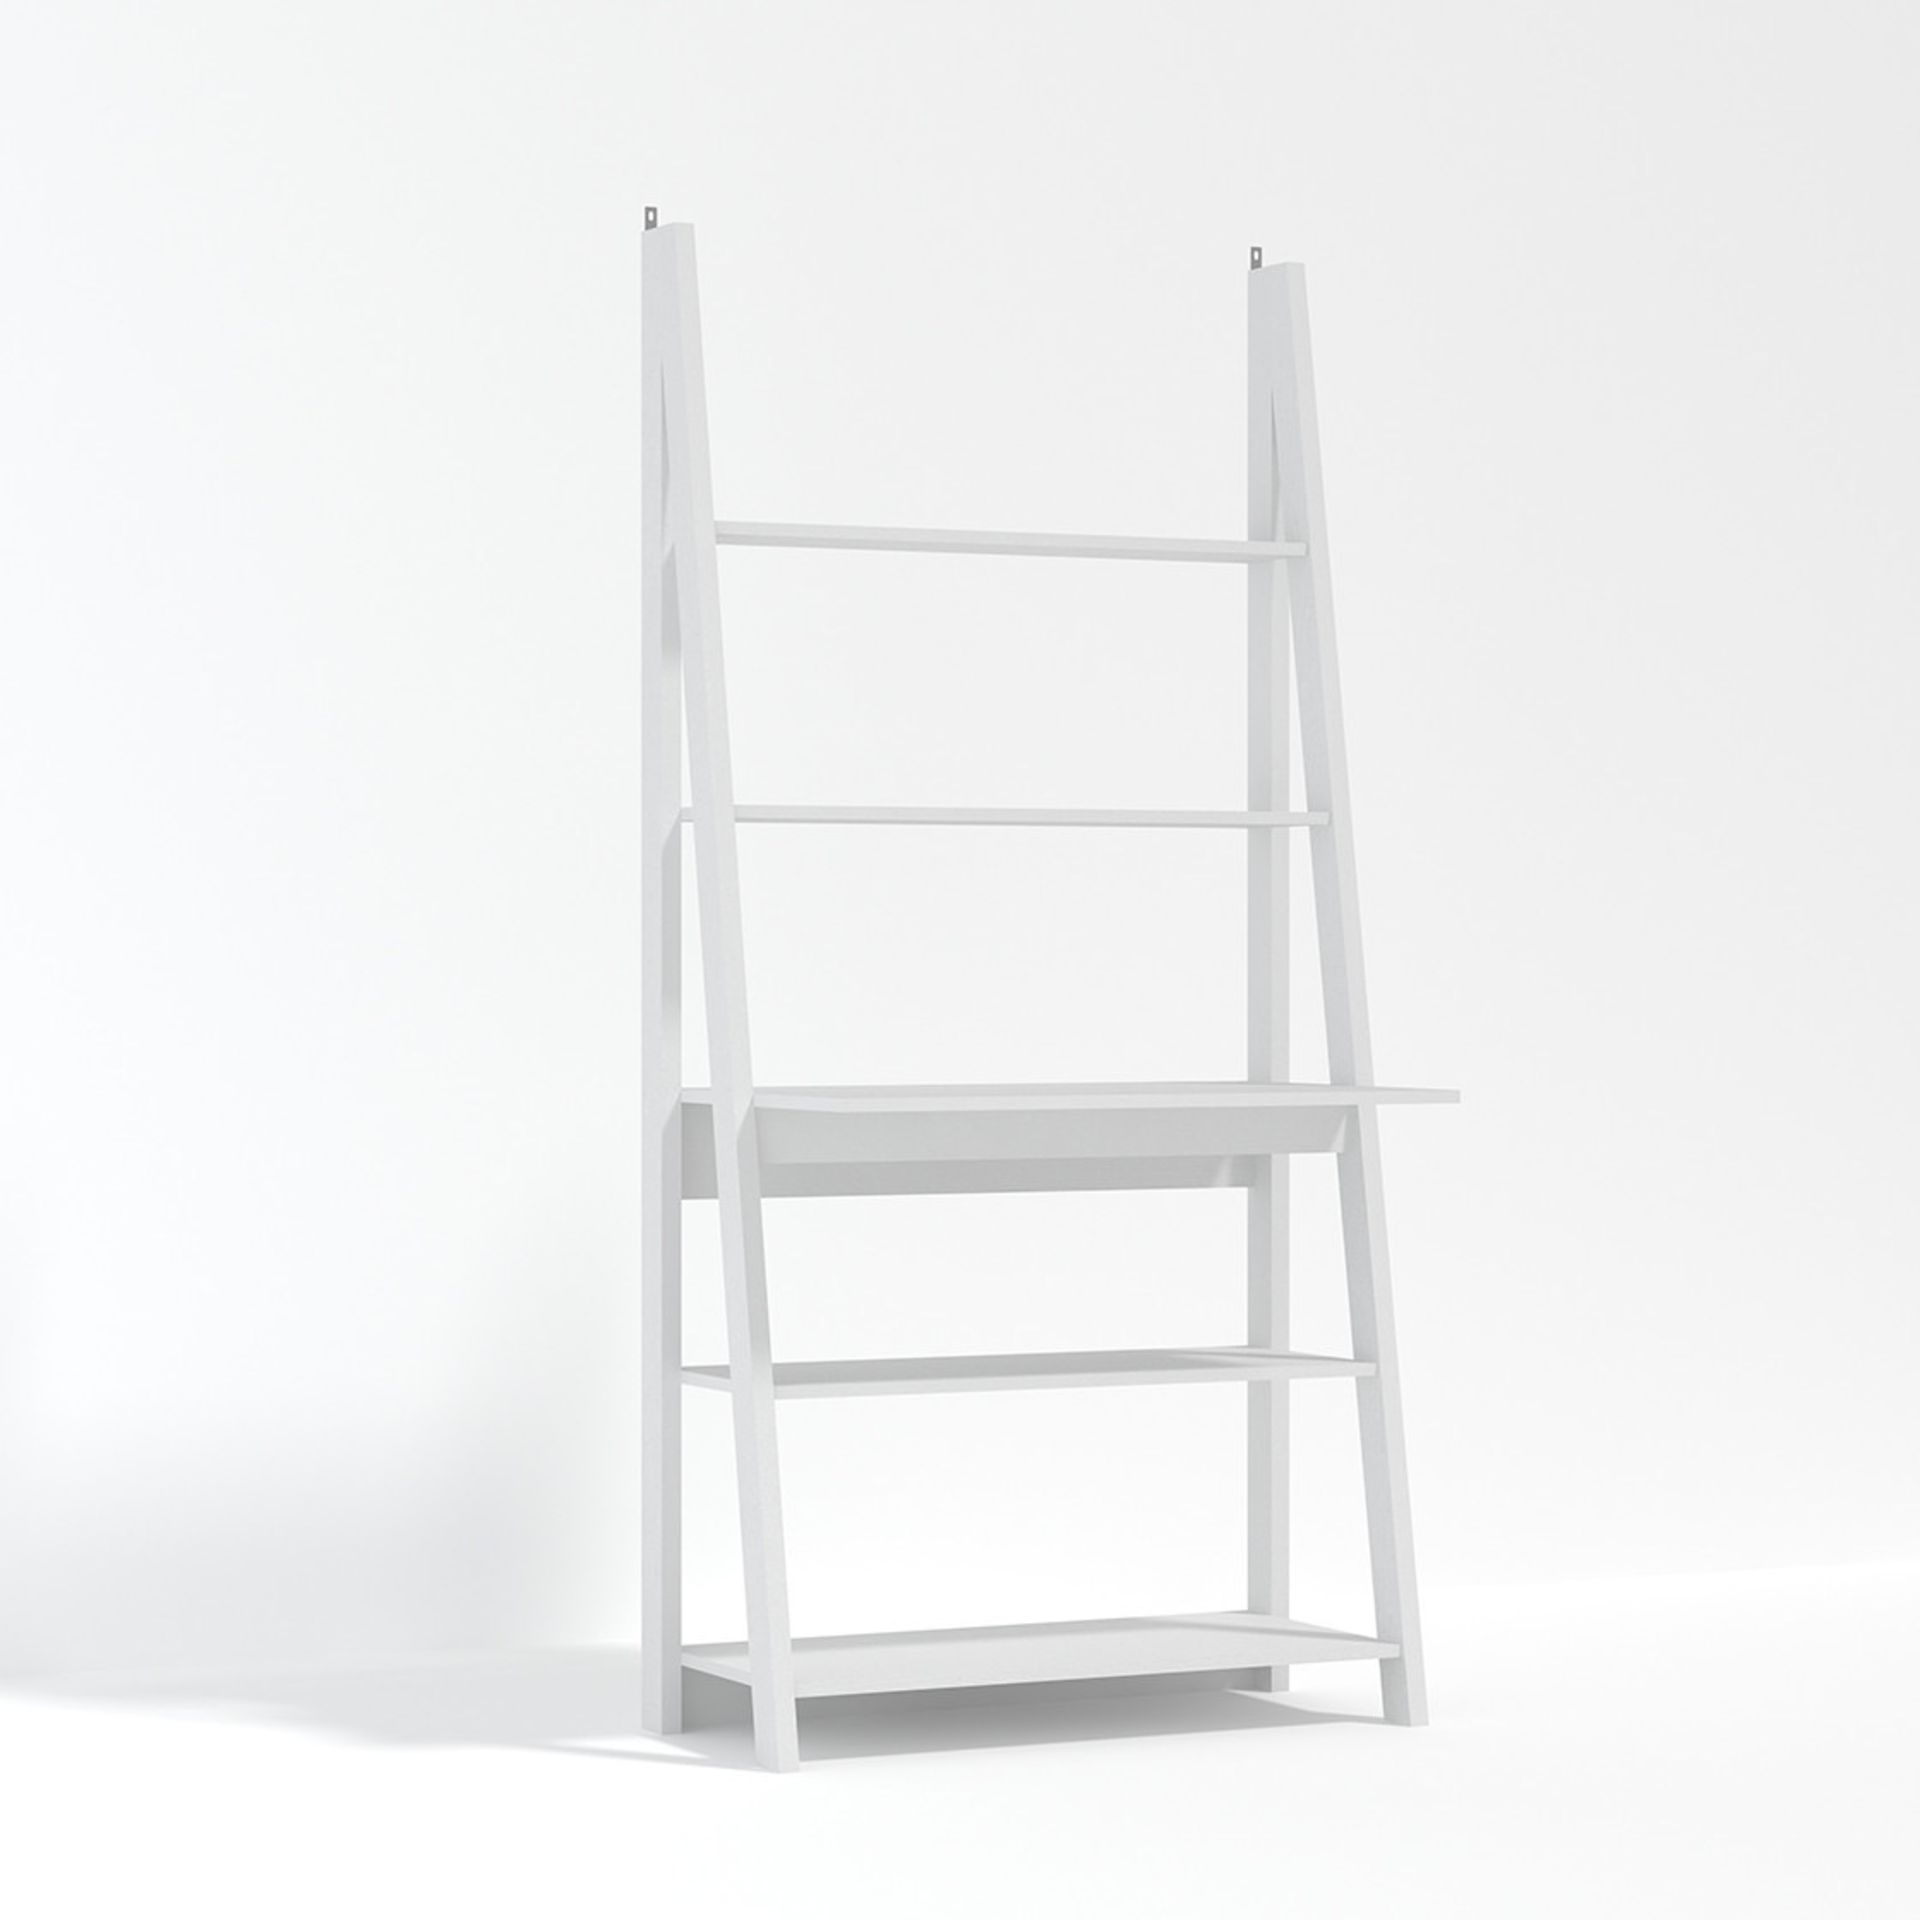 TIVA SHELVING UNIT WITH DESK IN WHITE - RRP £159 - Image 2 of 2